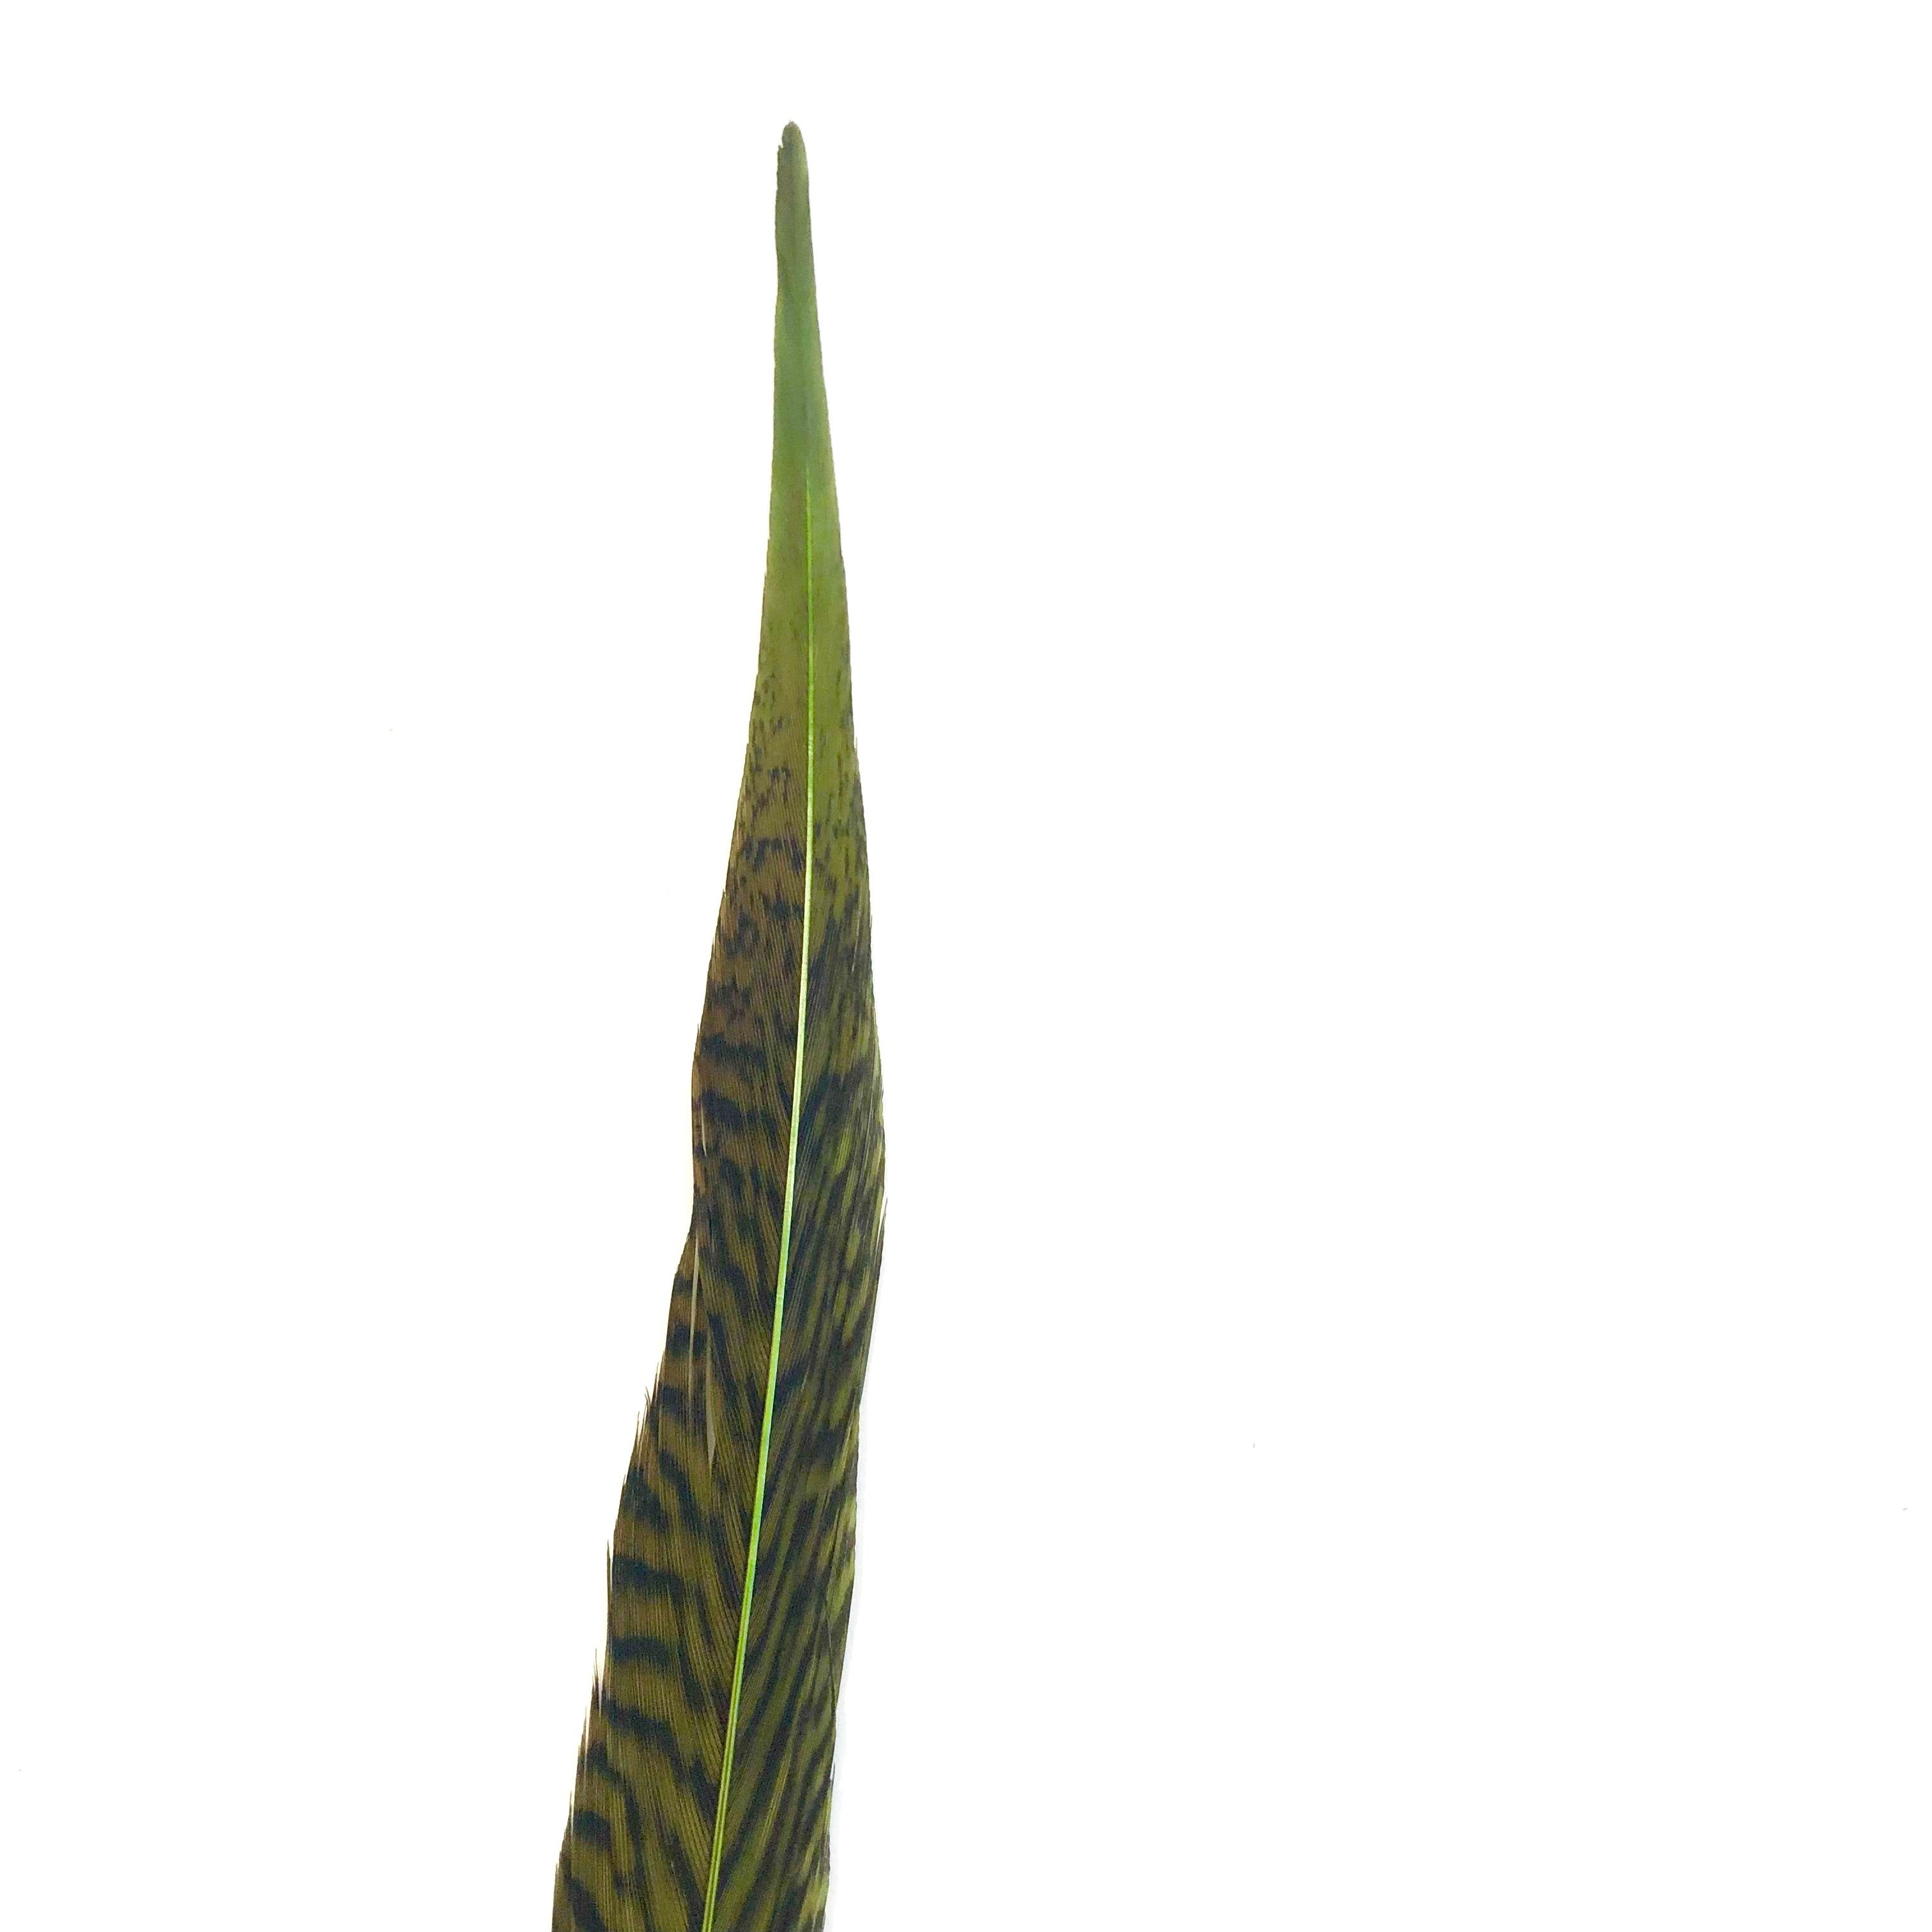 10" to 20" Golden Pheasant Side Tail Feather - Olive Green